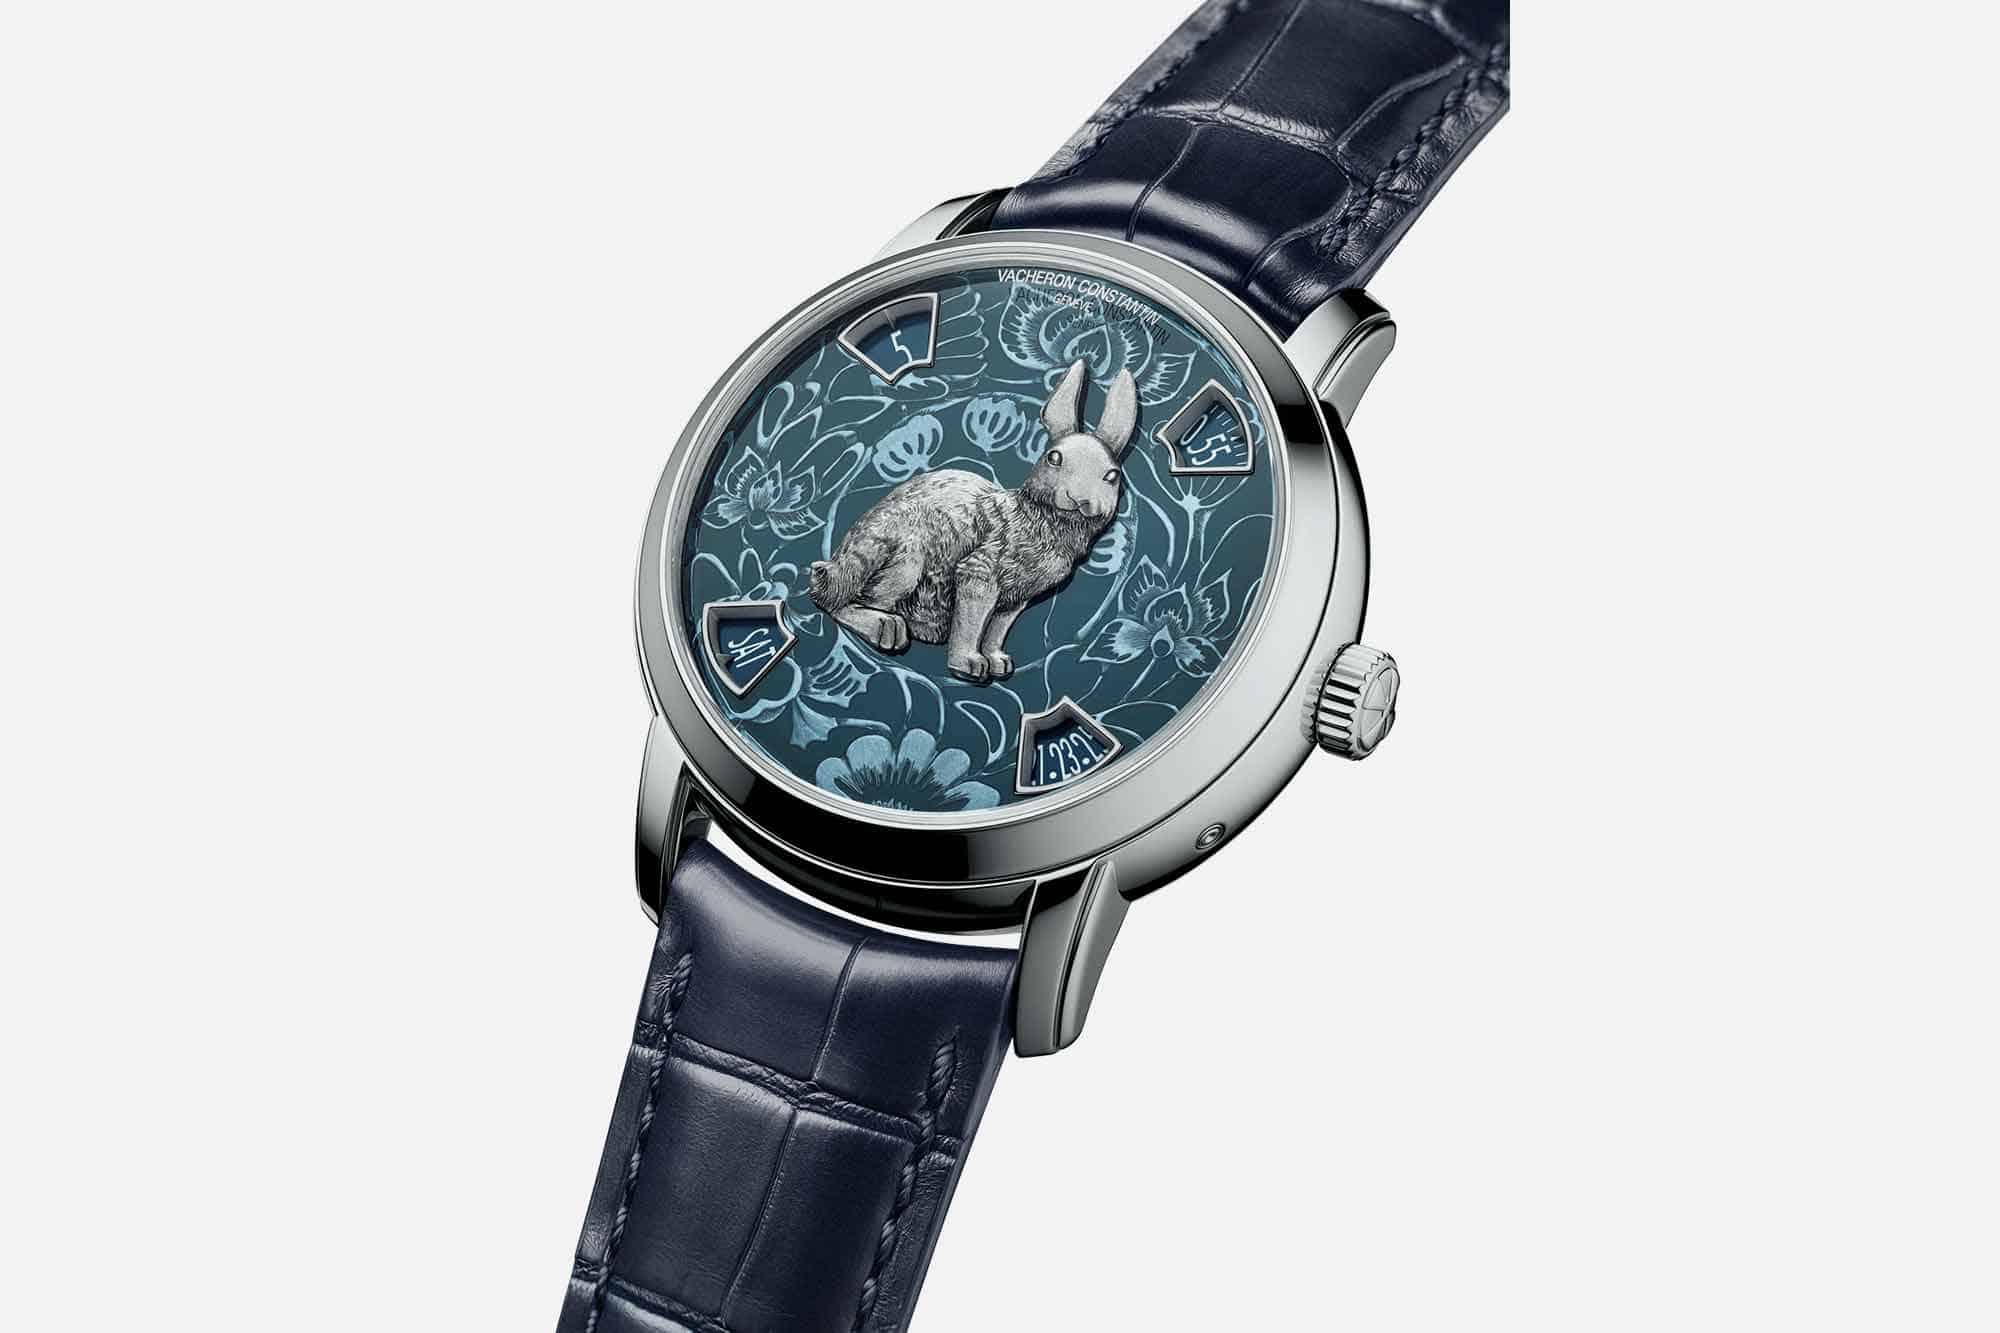 Why I Love It: The Vacheron Constantin Metiers d’Art Lunar New Year Watches, Plus a Brief Survey of “Year of the Rabbit” Limited Editions